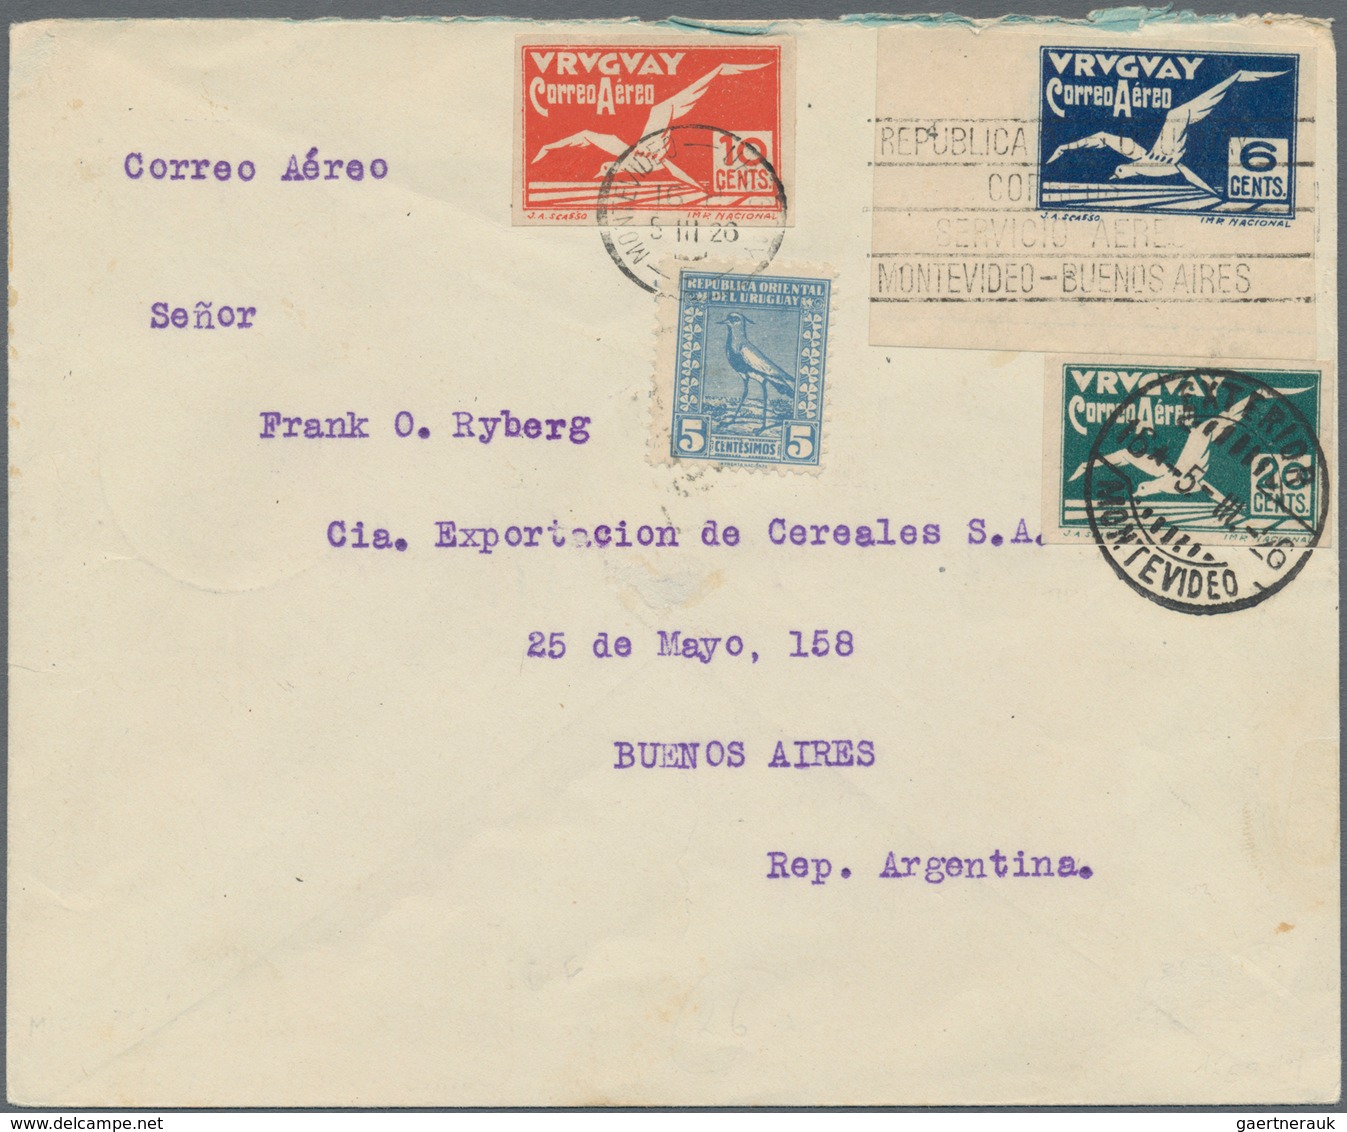 Uruguay: 1926, First Flight Cover "MONTEVIDEO - BUENOS AIRES" Bearing Attractive Imperf Franking Tie - Uruguay